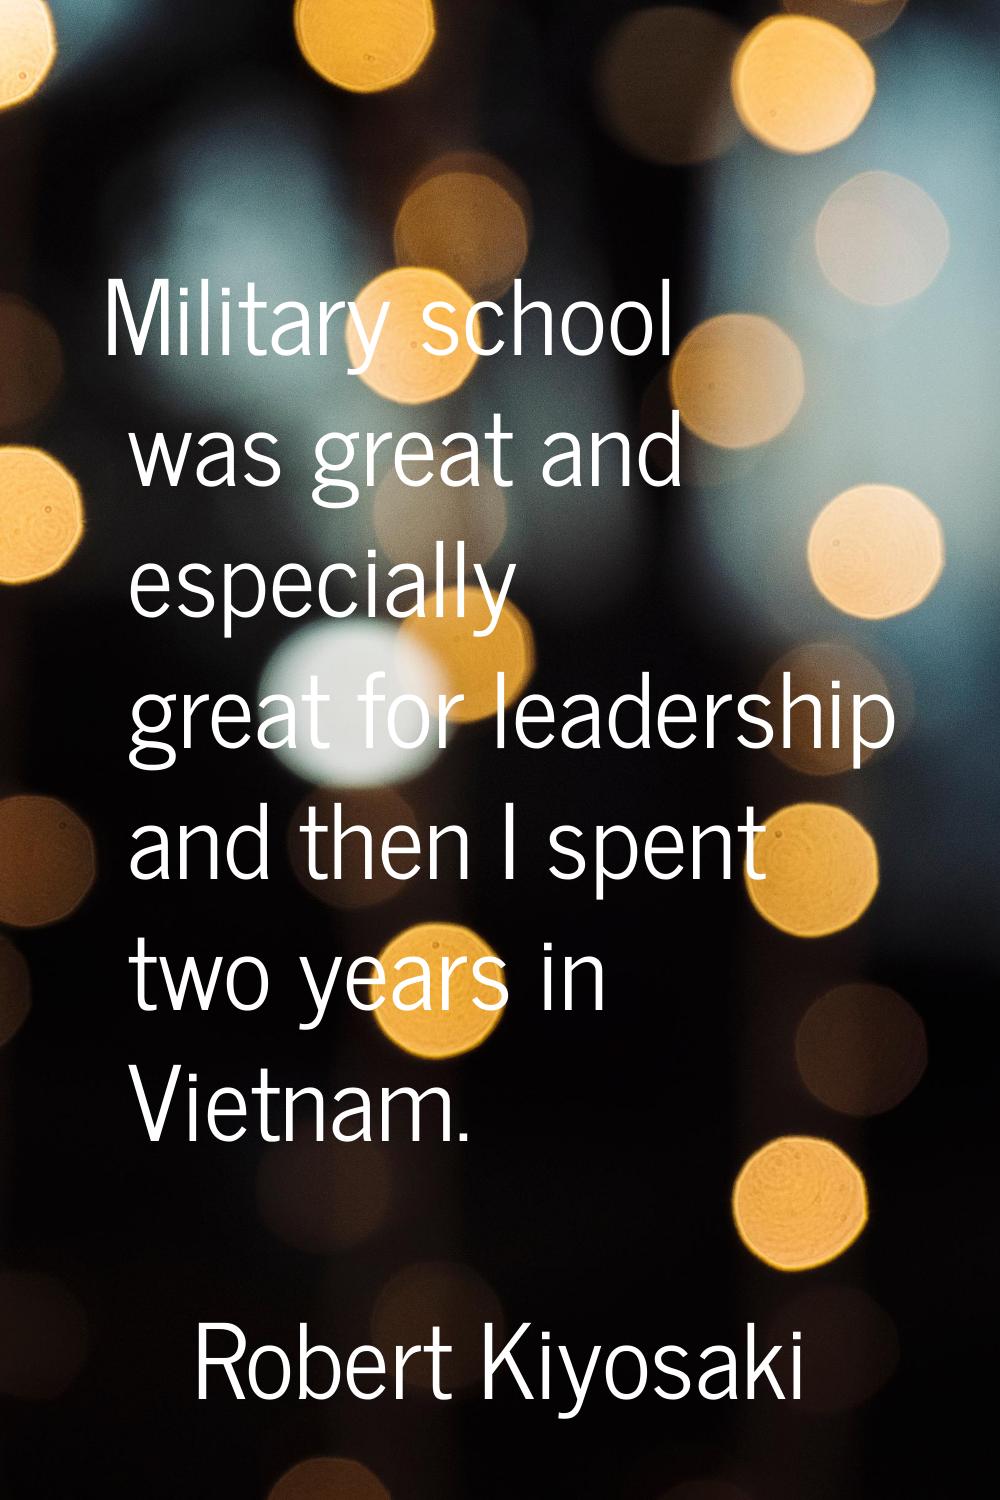 Military school was great and especially great for leadership and then I spent two years in Vietnam